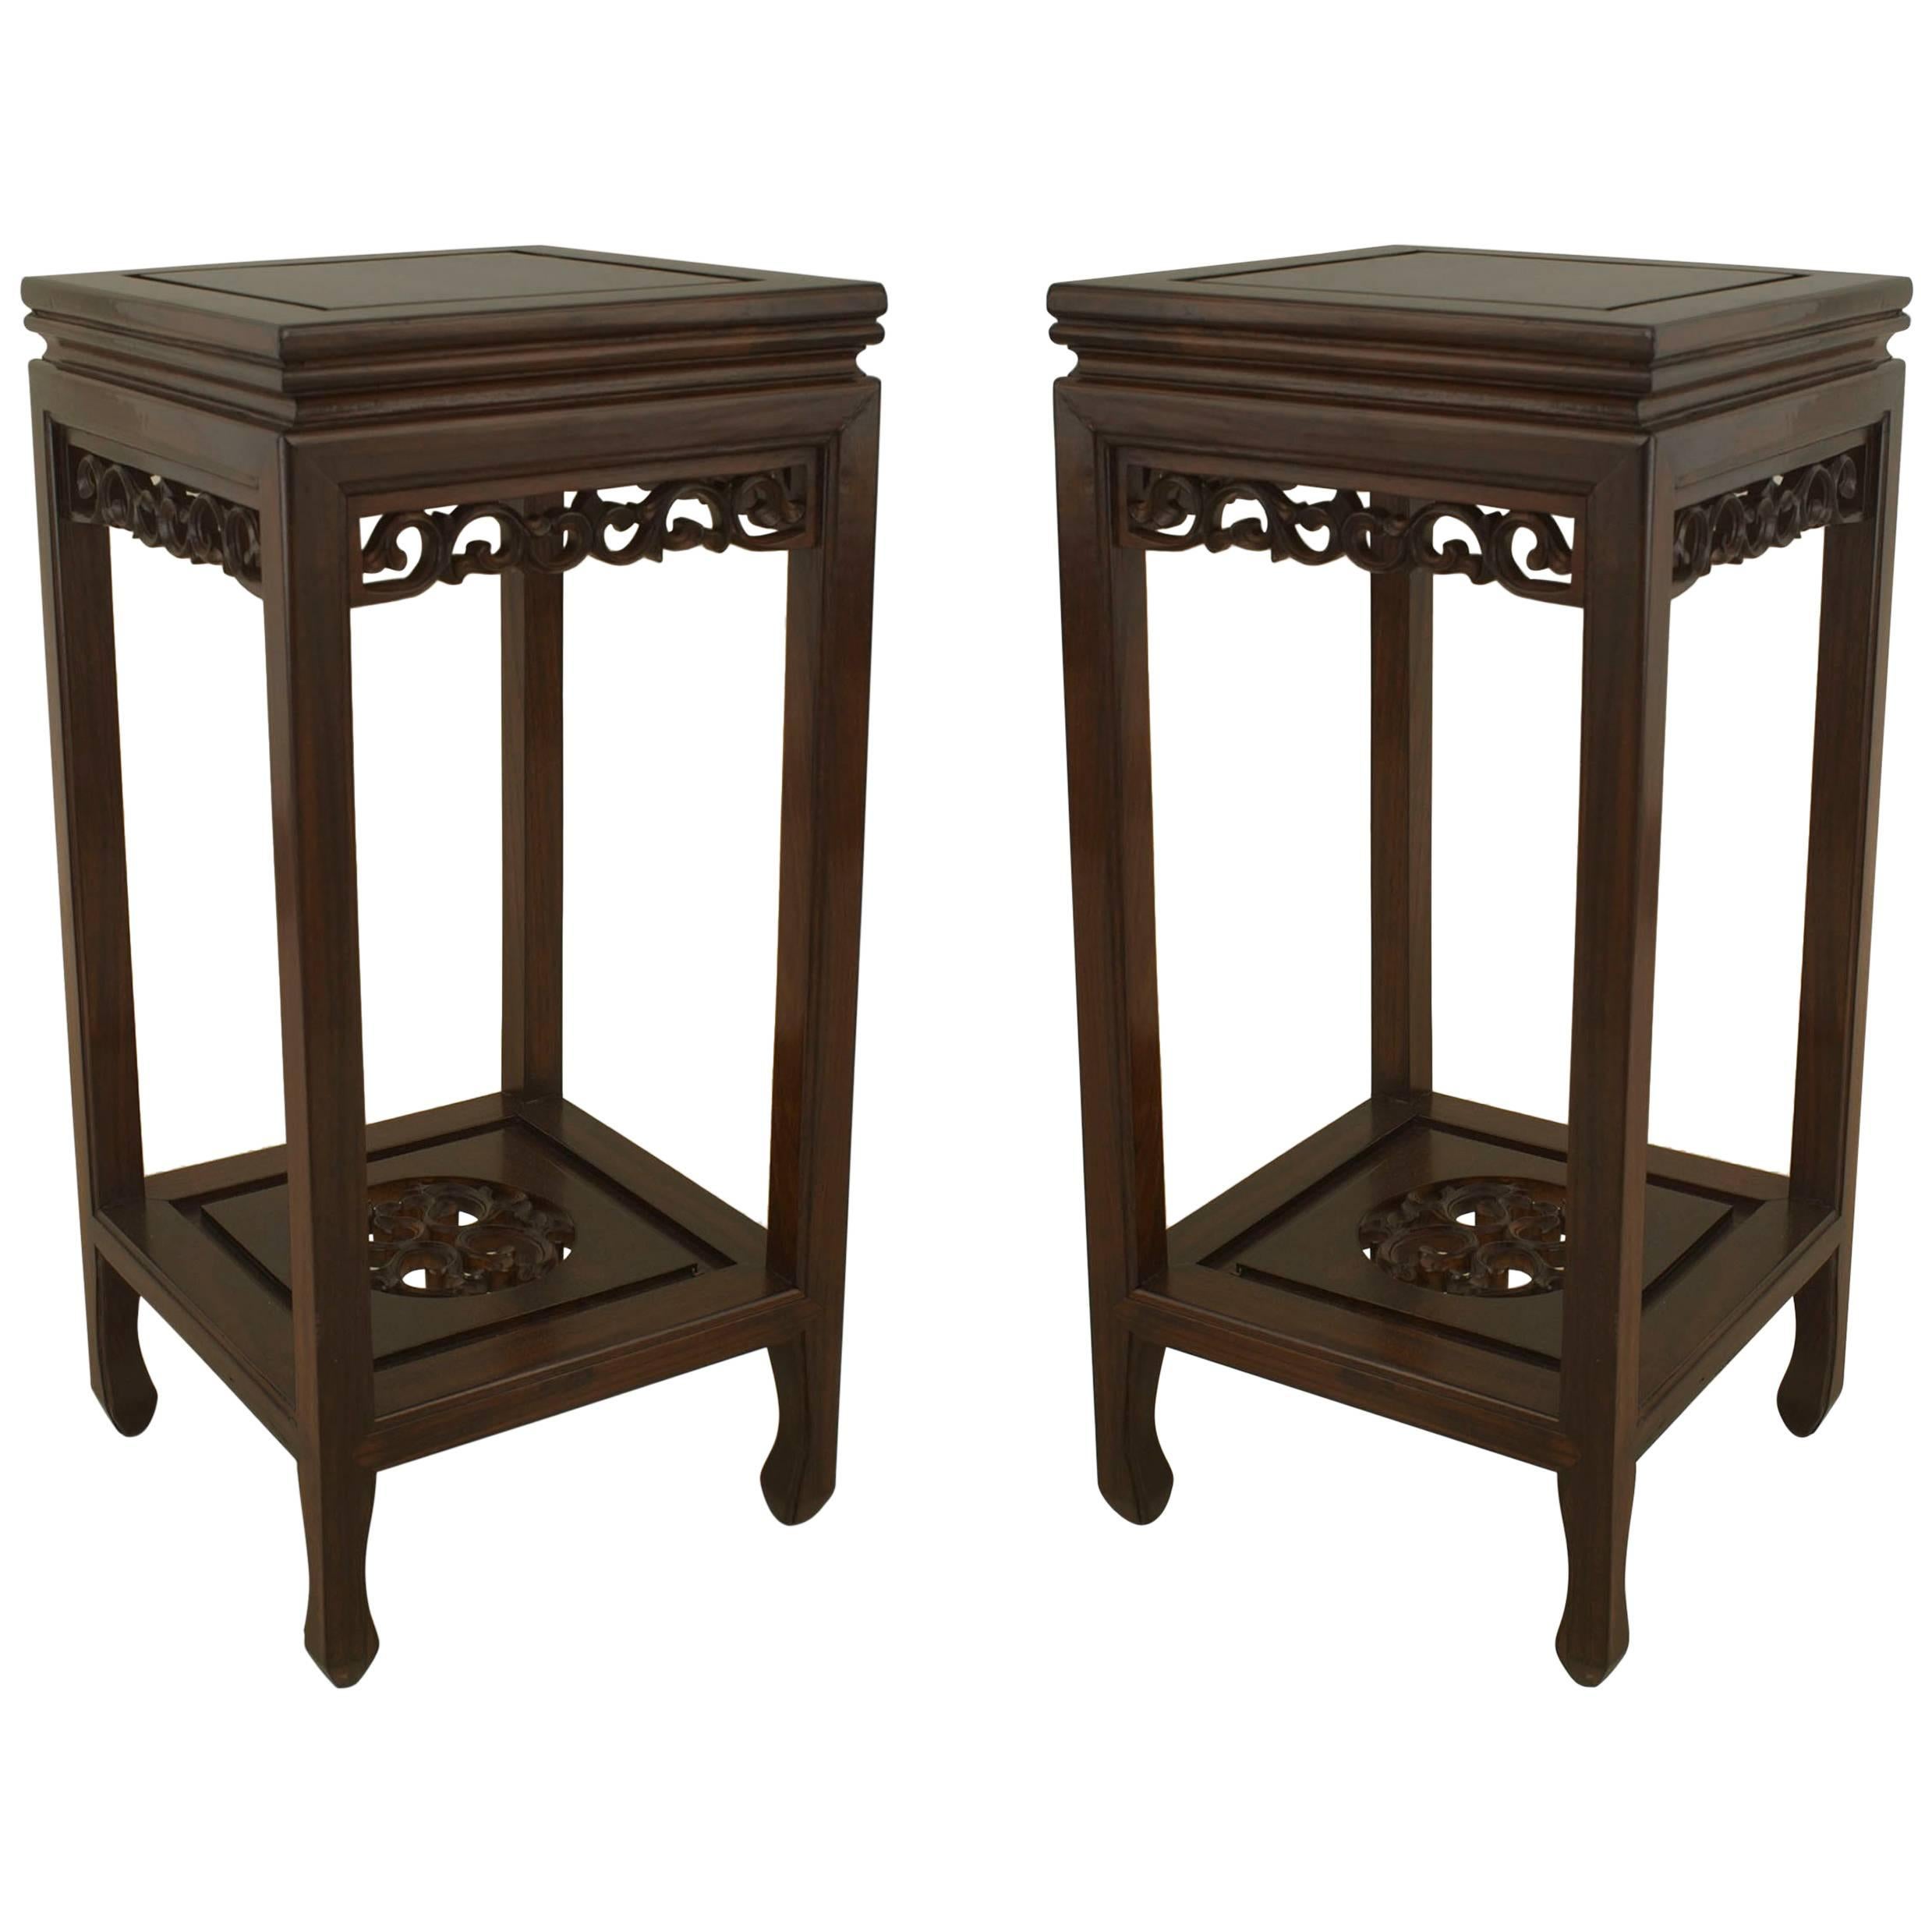 Pair of Chinese Carved Rosewood Pedestals